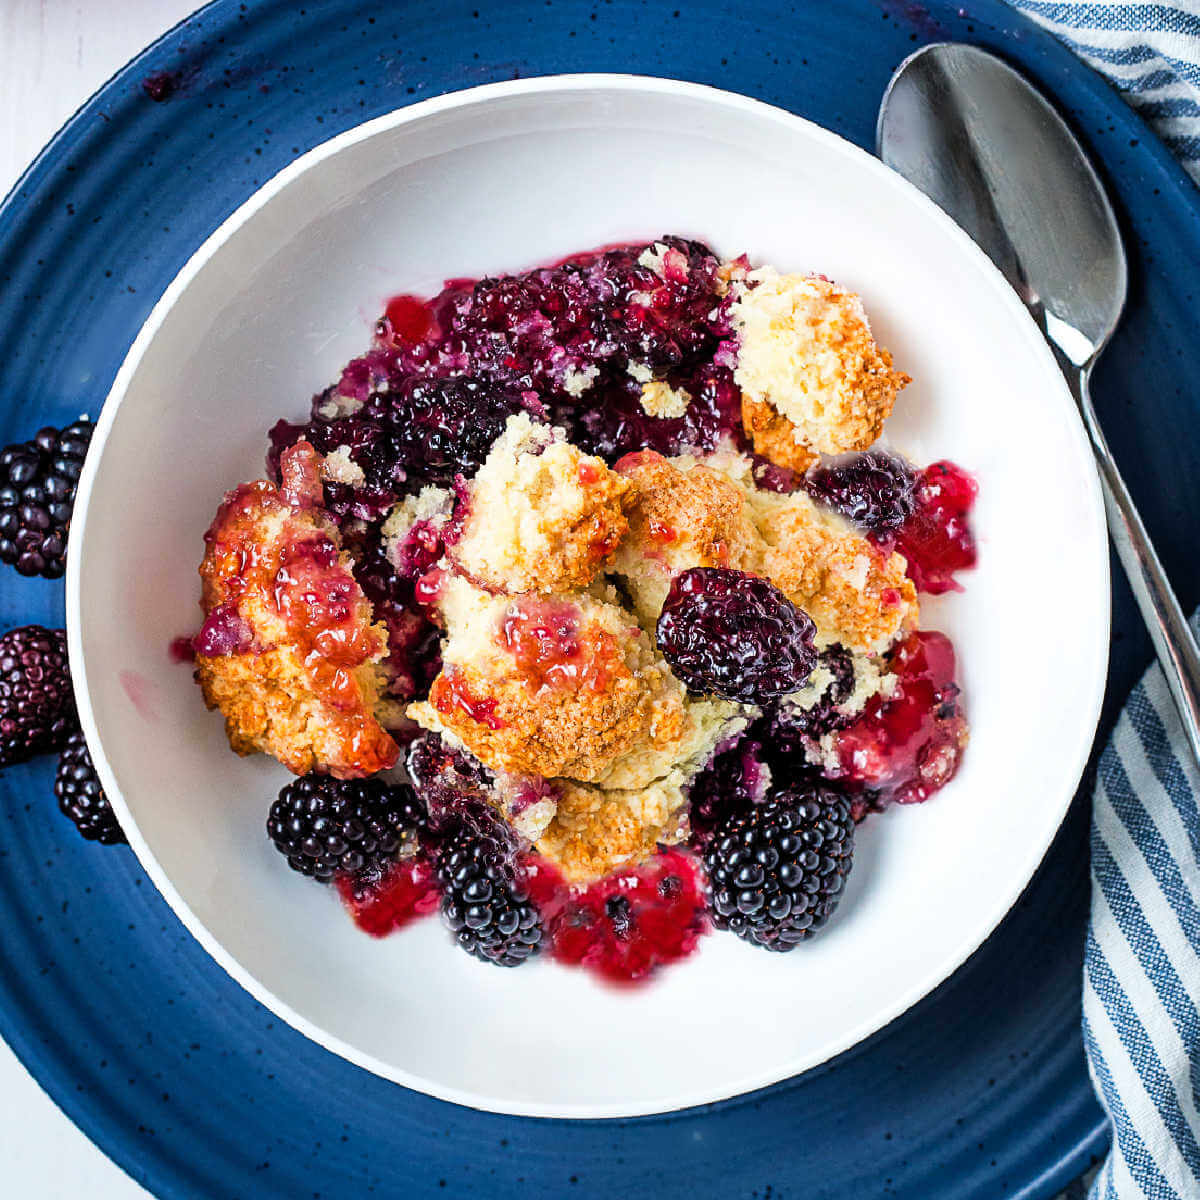 Easy Blackberry Cobbler Recipe with Sweet Biscuit Crumble